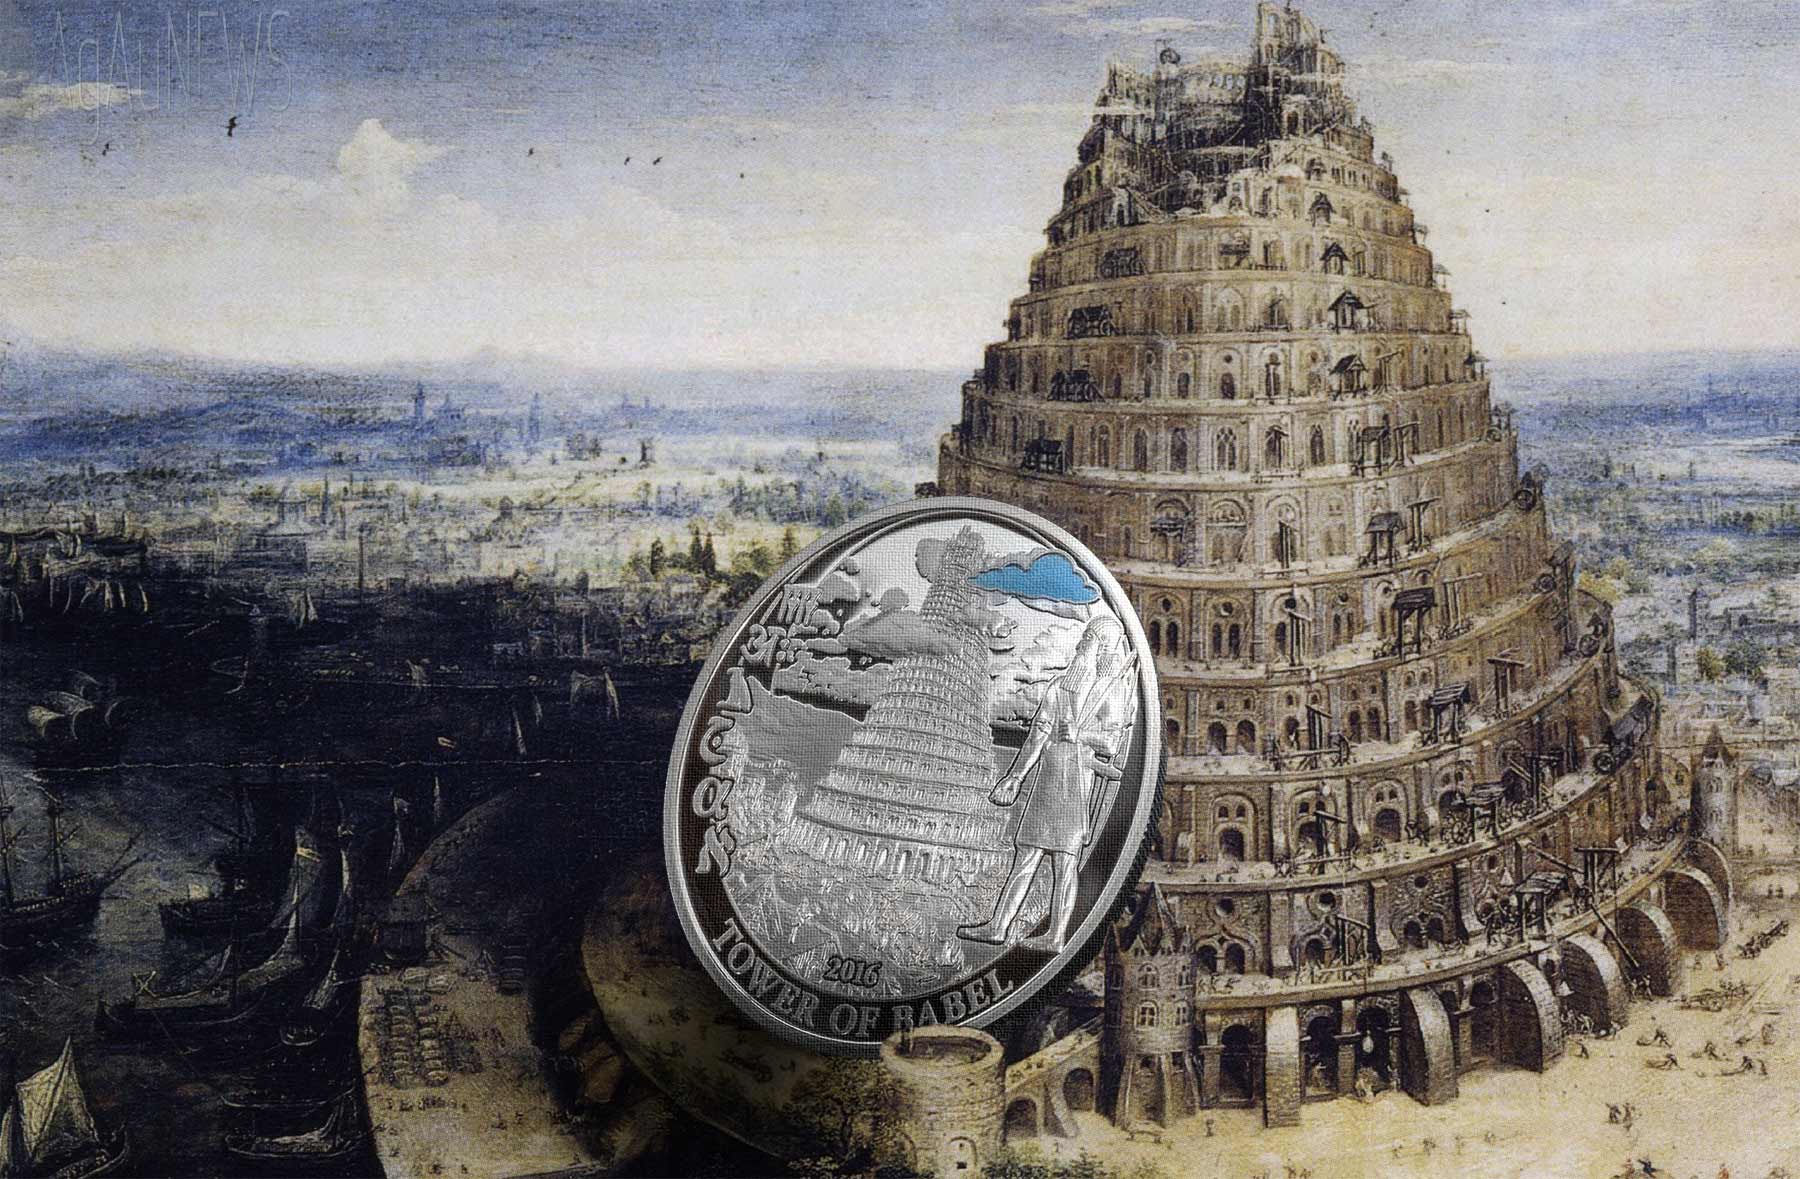 Numiscollects Biblical Stories silver coin series spotlights the ...